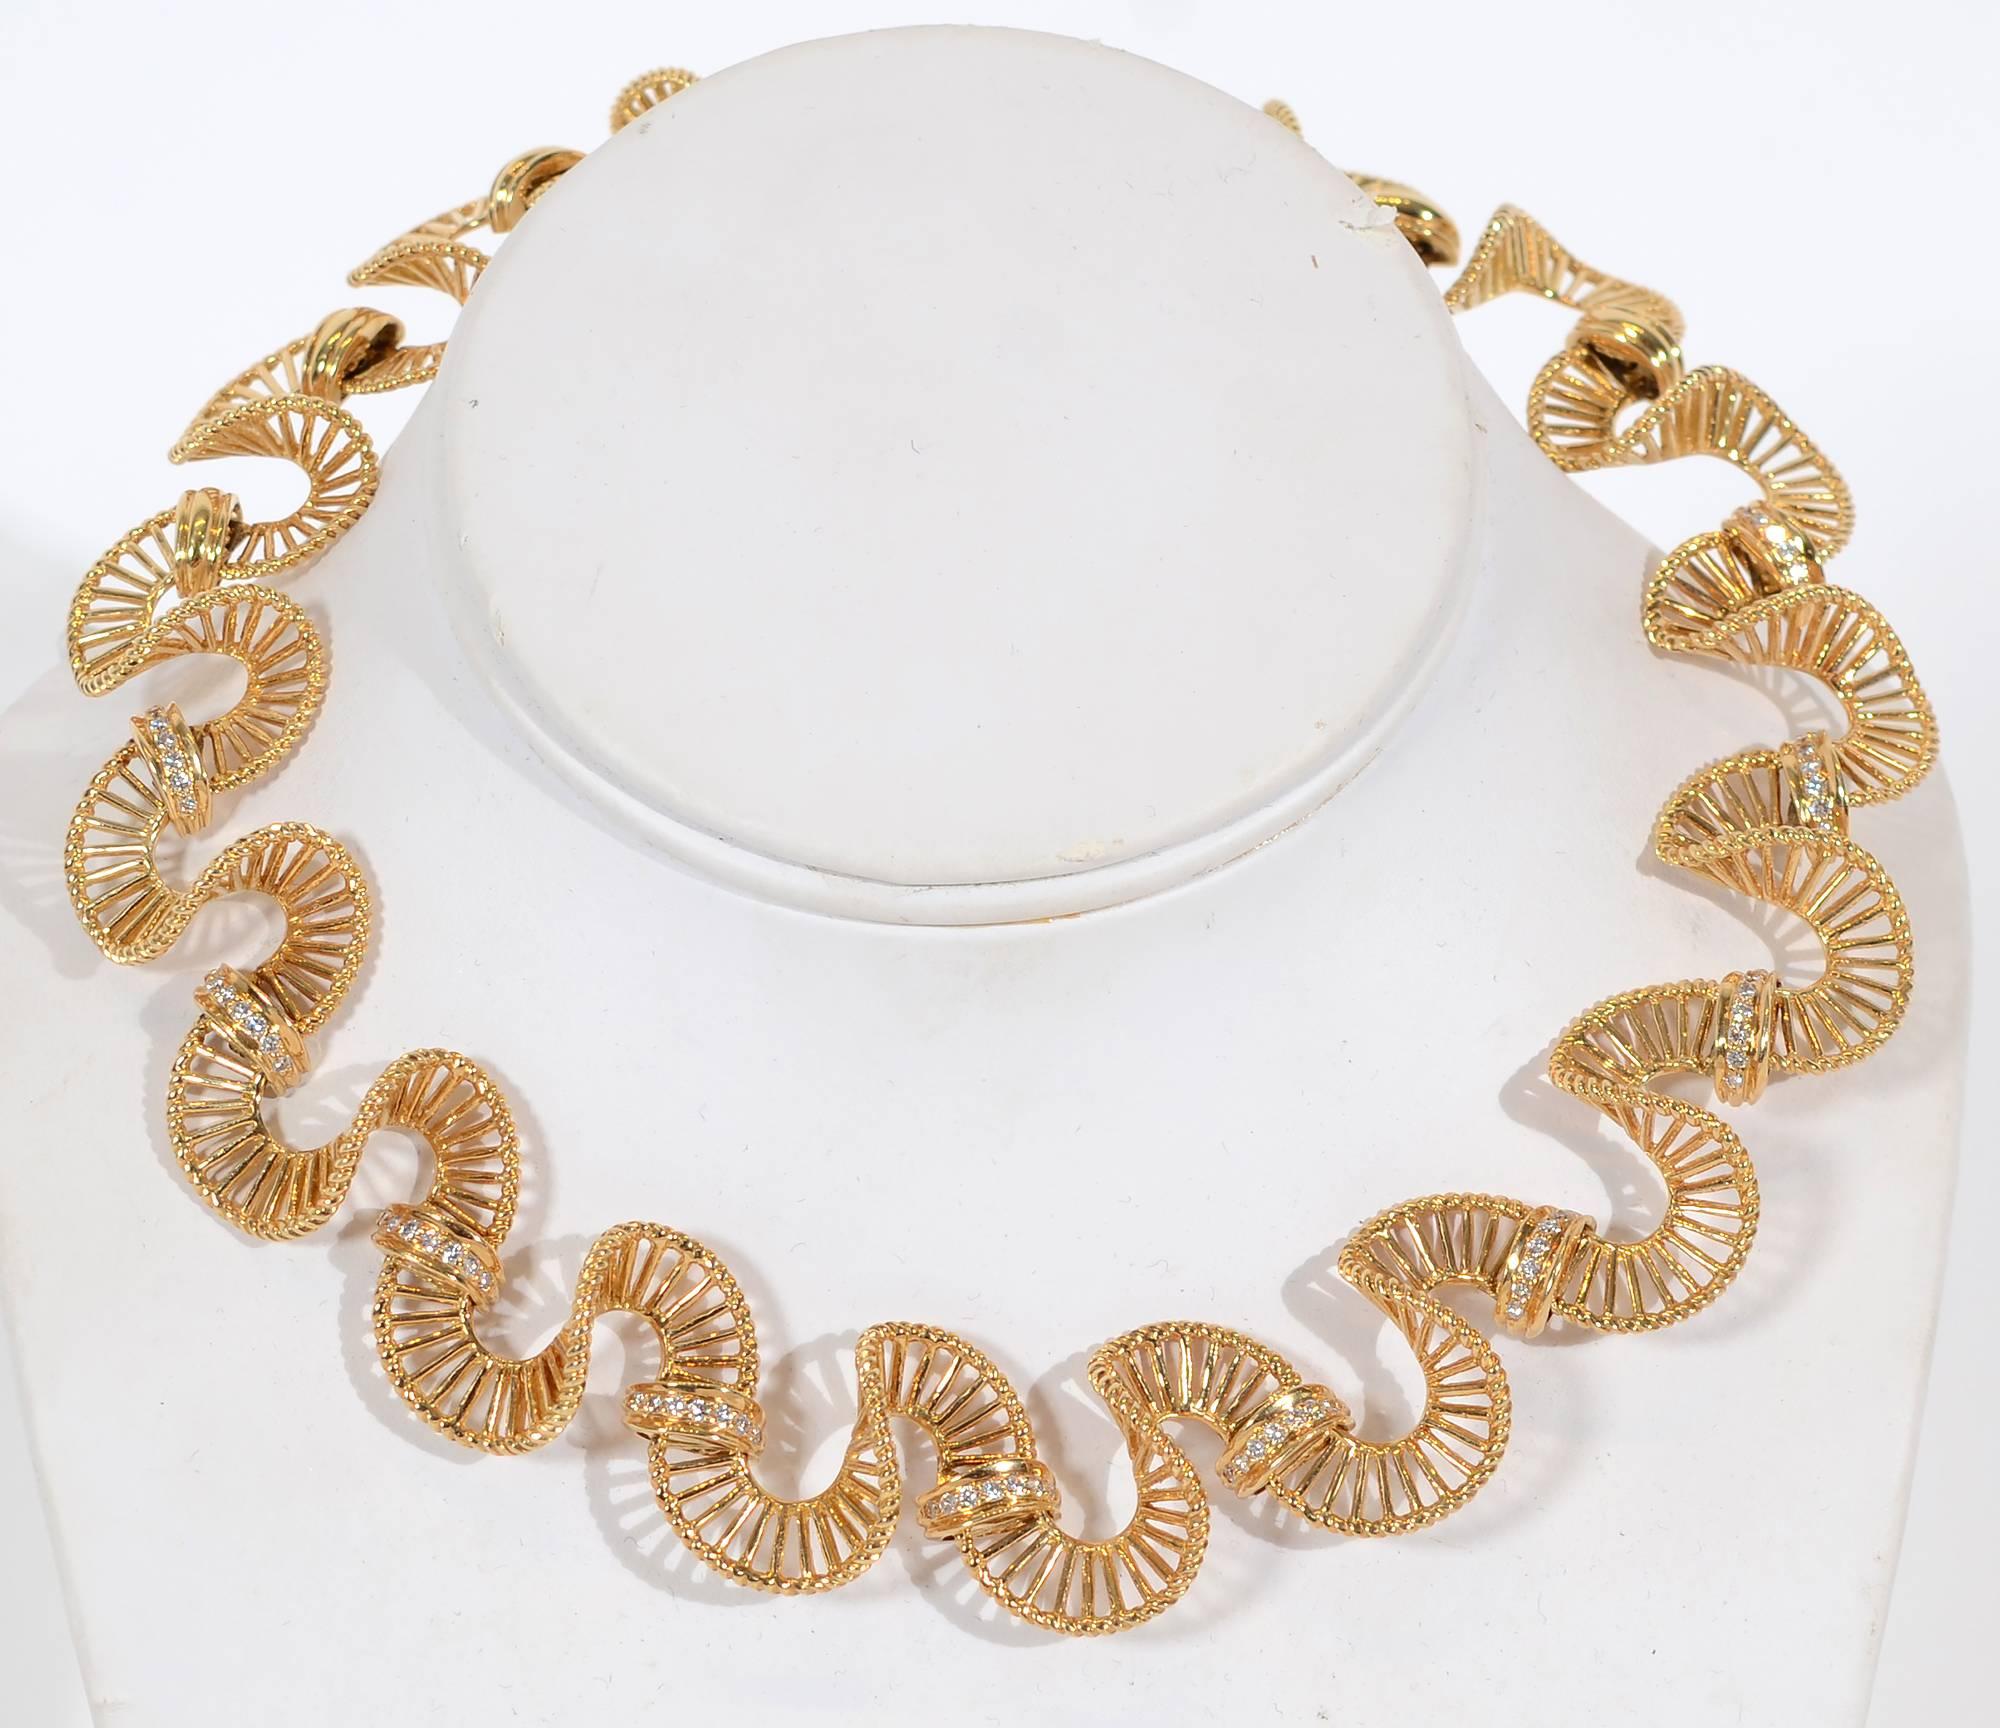 This graceful ribbon-like gold necklace with diamonds was made by Irving Gold, designer of jewelry for Van Cleef and Arpels. This piece was from his personal collection made for his wife. 
Seventy diamonds have an approximate weight of 1.75 carats.